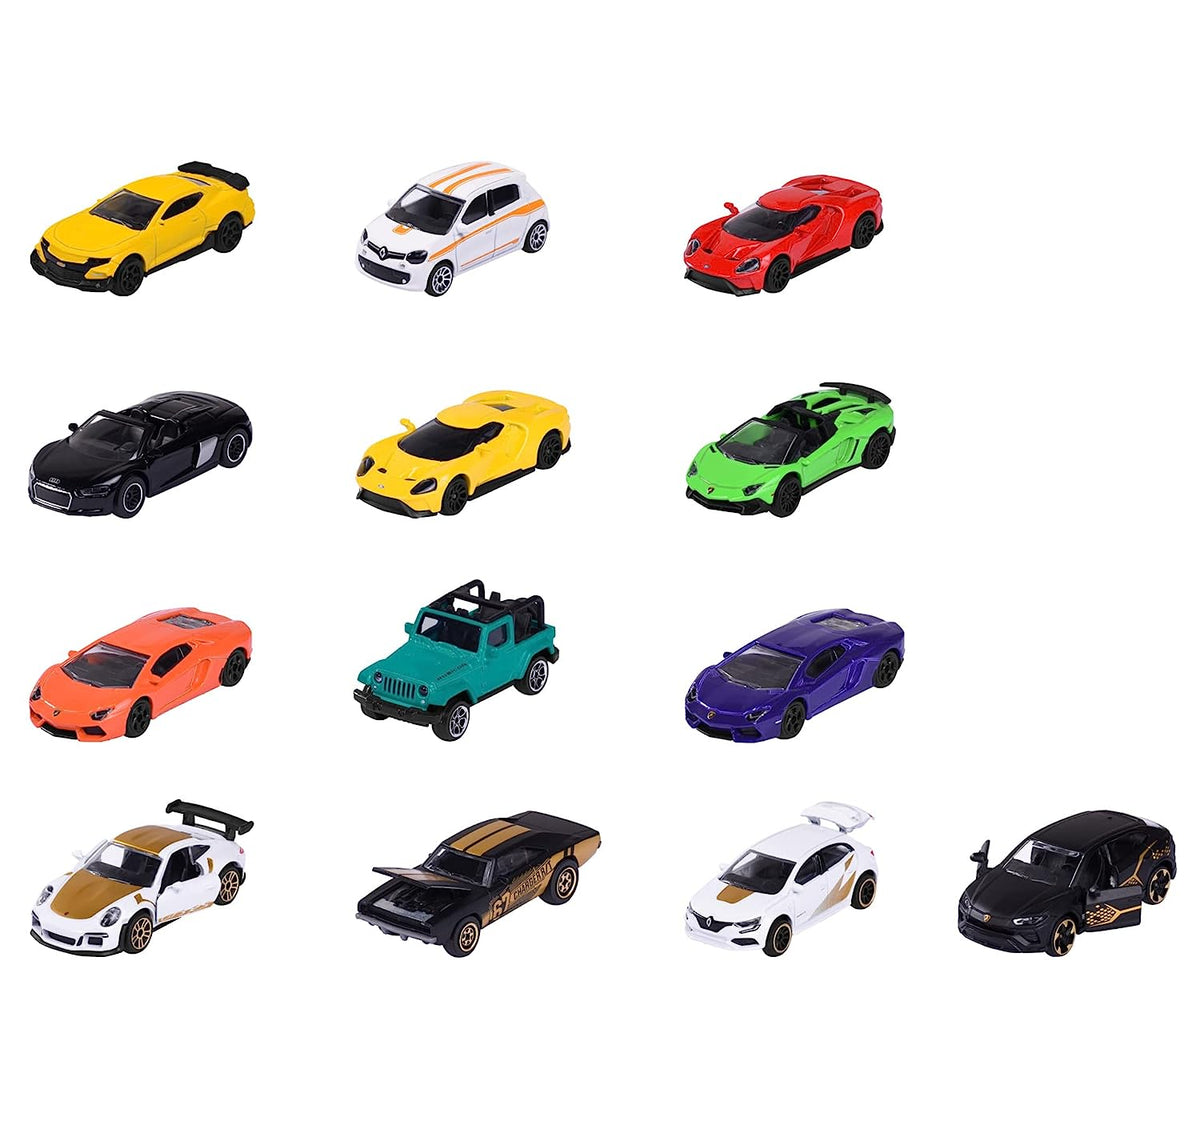 Majorette Limited Edition 9 - Set of 13 Vehicles in The Ultimate Gift Set with Limited Edition Cars